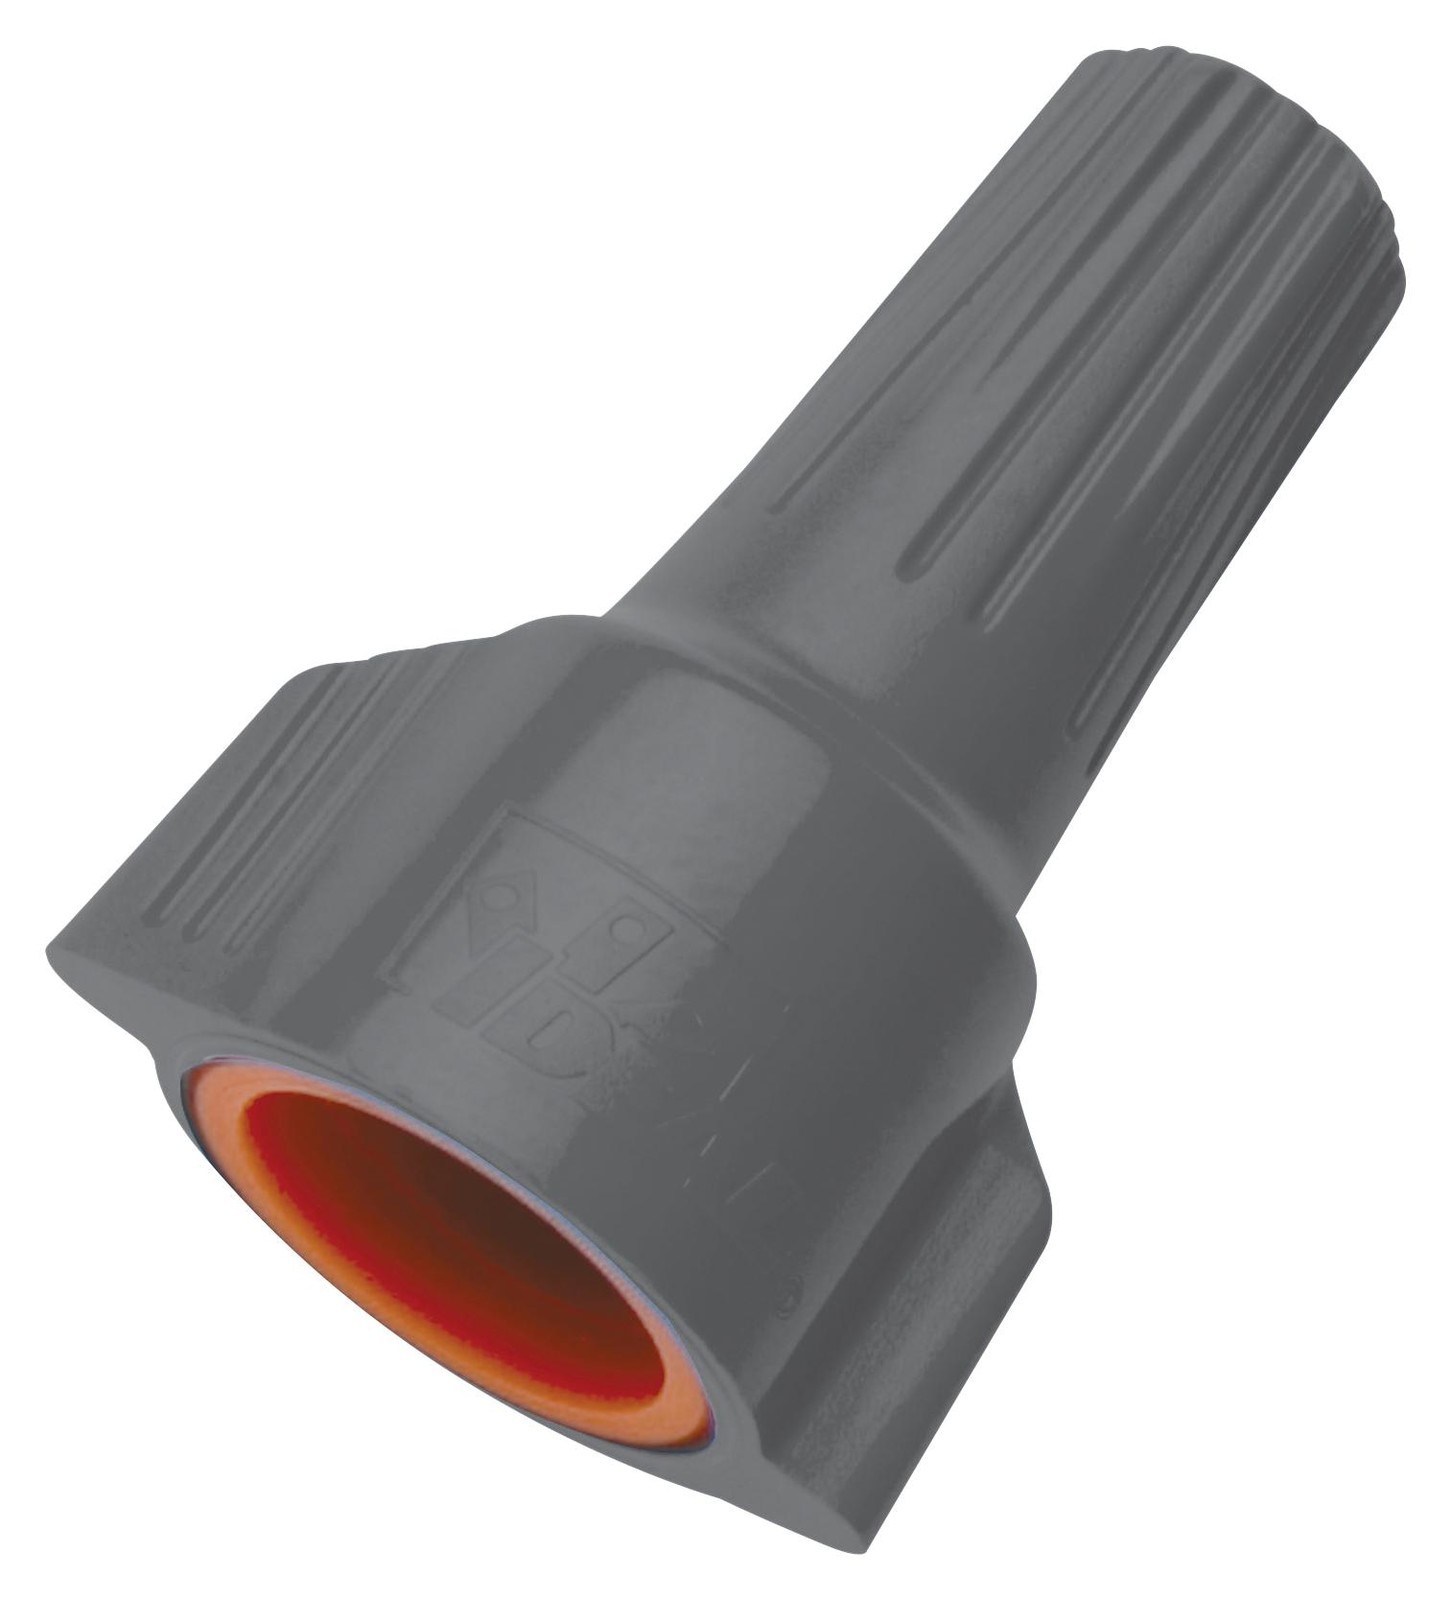 Ideal 30-1261J Terminal, Connector, Twist On, Gray/org